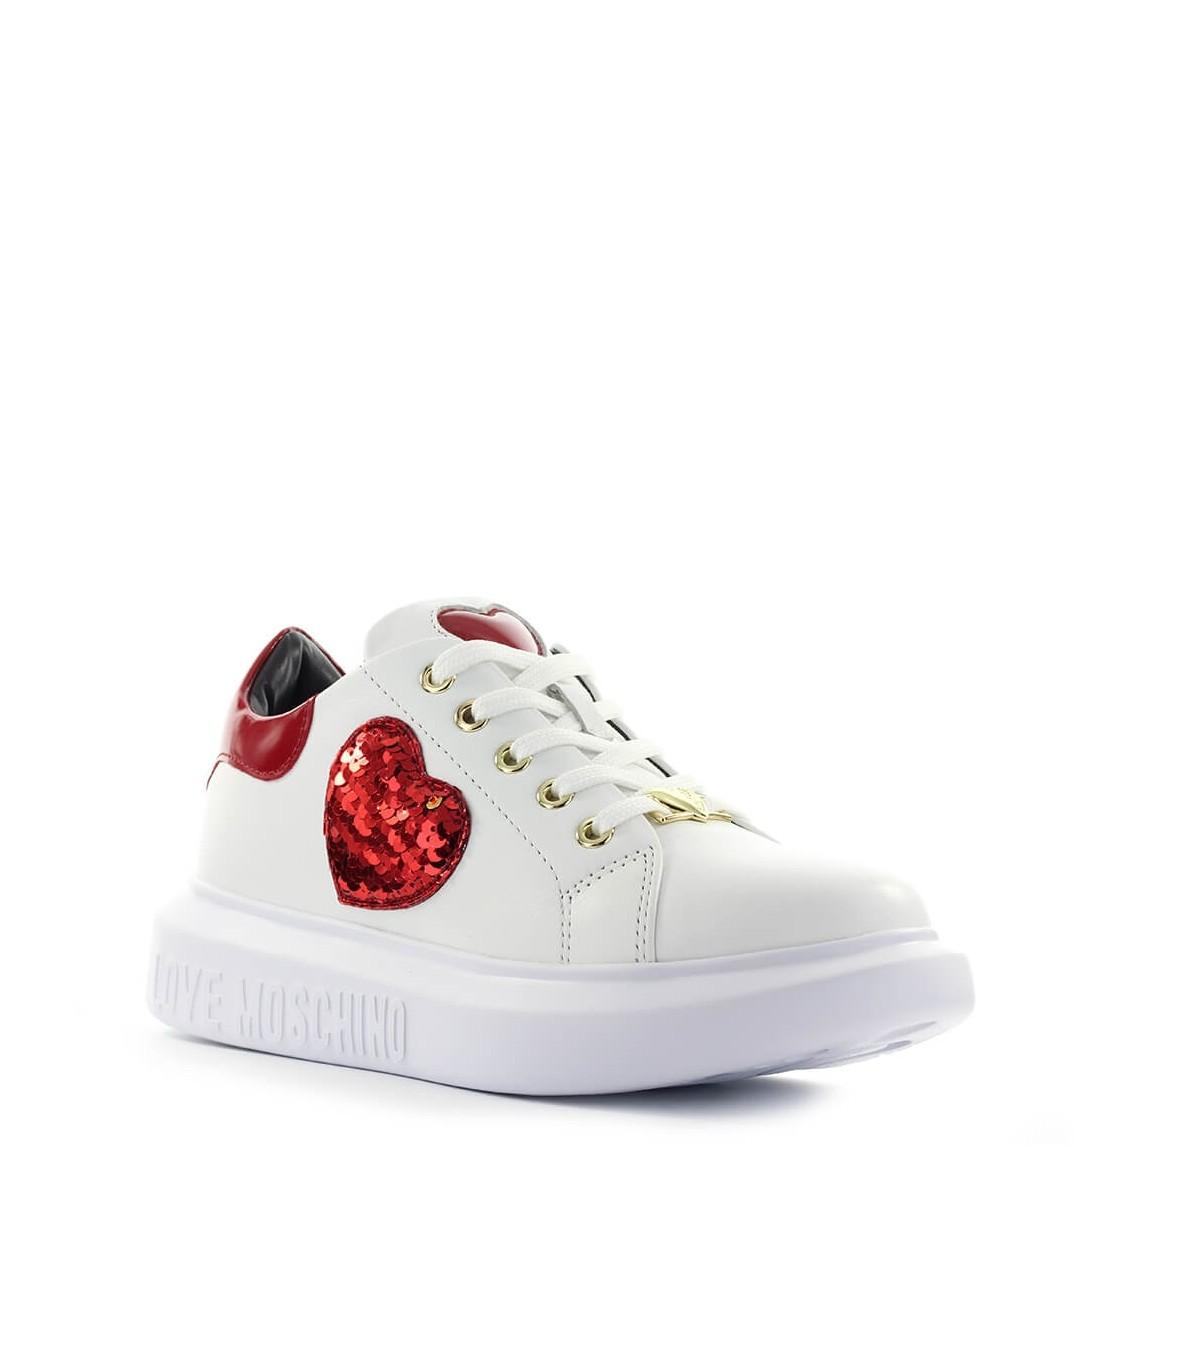 Love Moschino Leather Red Heart White Sneaker | Lyst